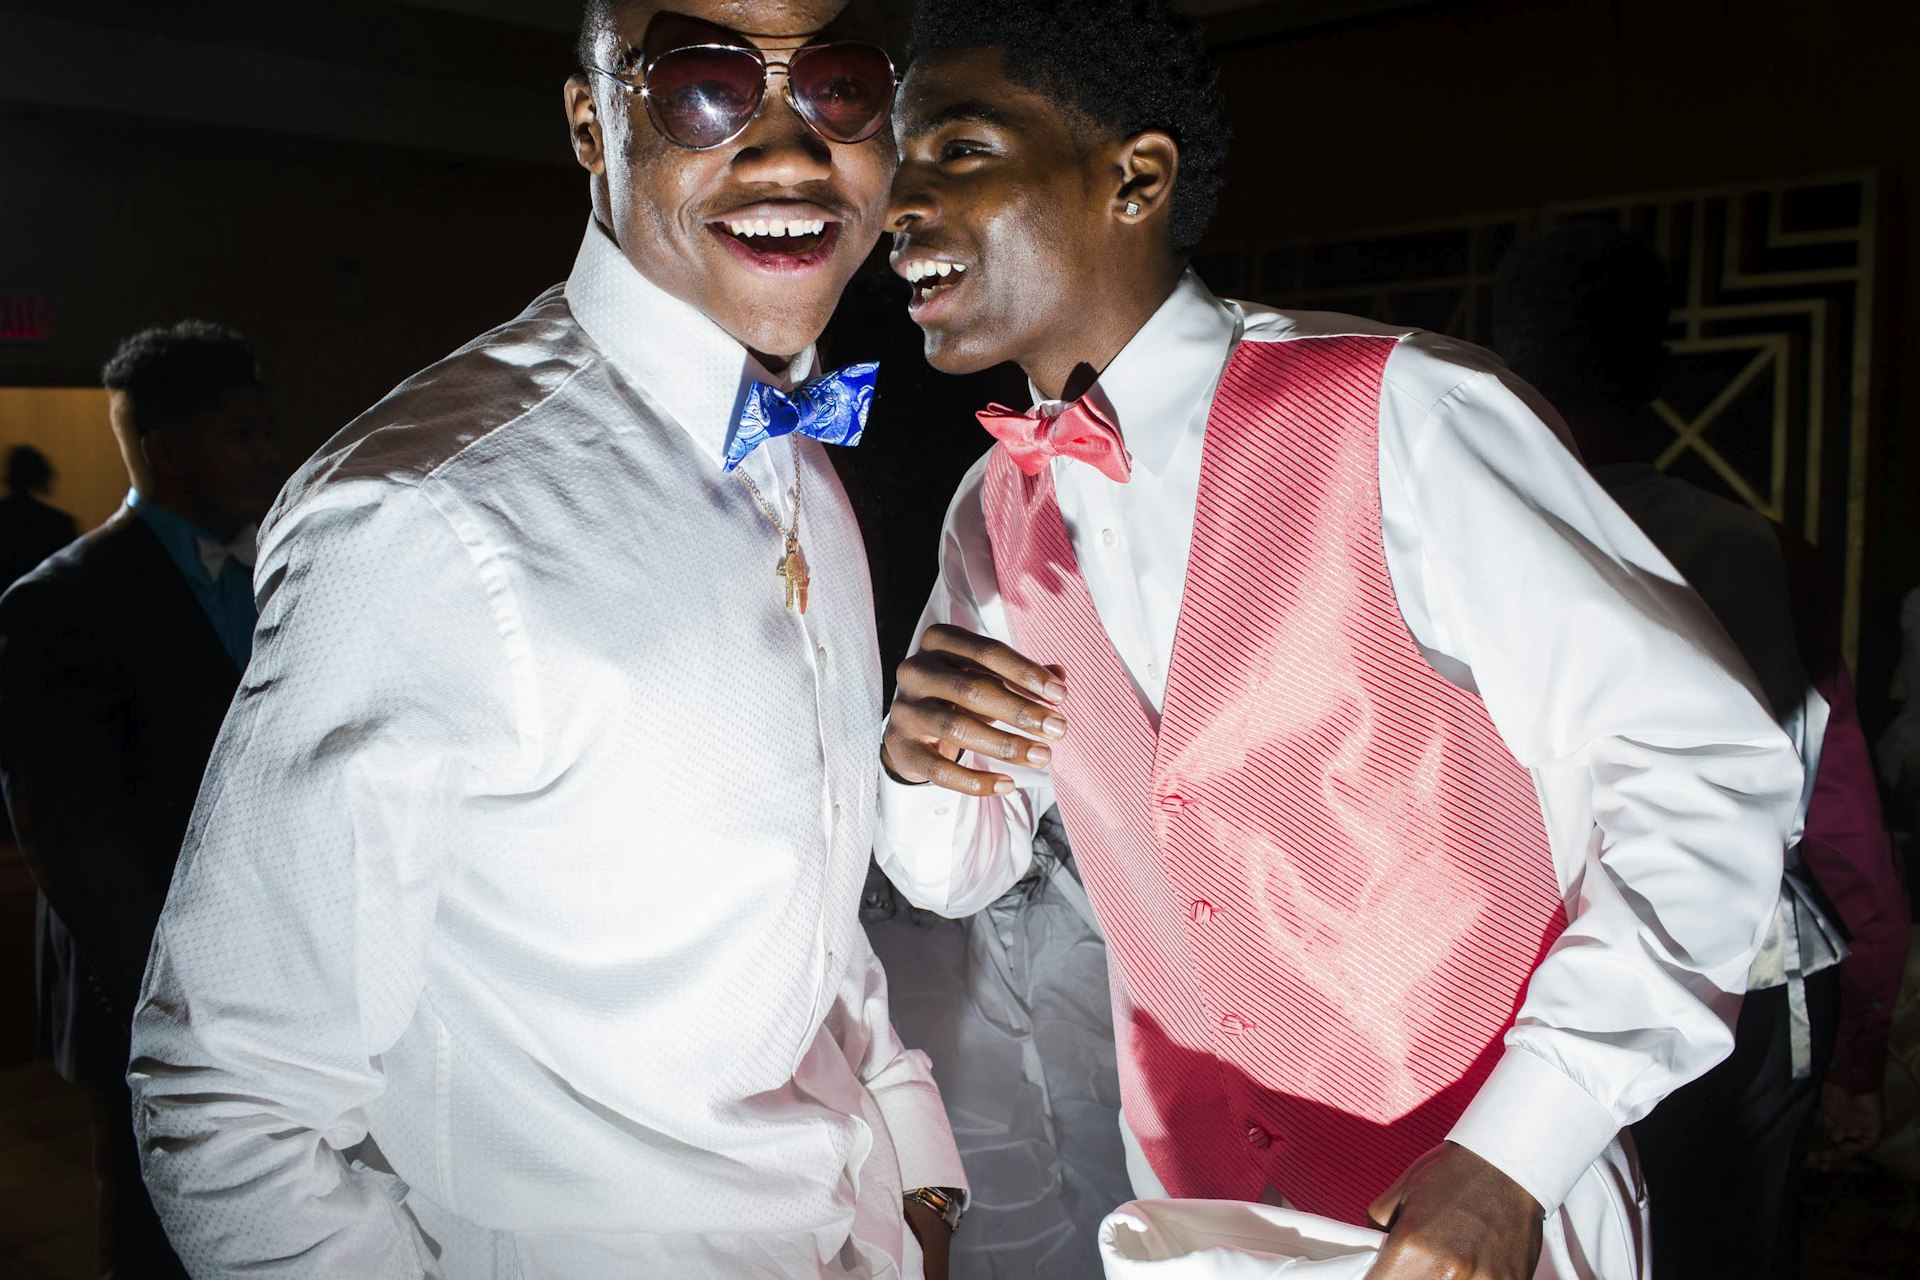 Antwoin Nelson, 18, left, and a friend  attend their high school prom on Saturday, May 21, 2016 in Flint, Michigan.